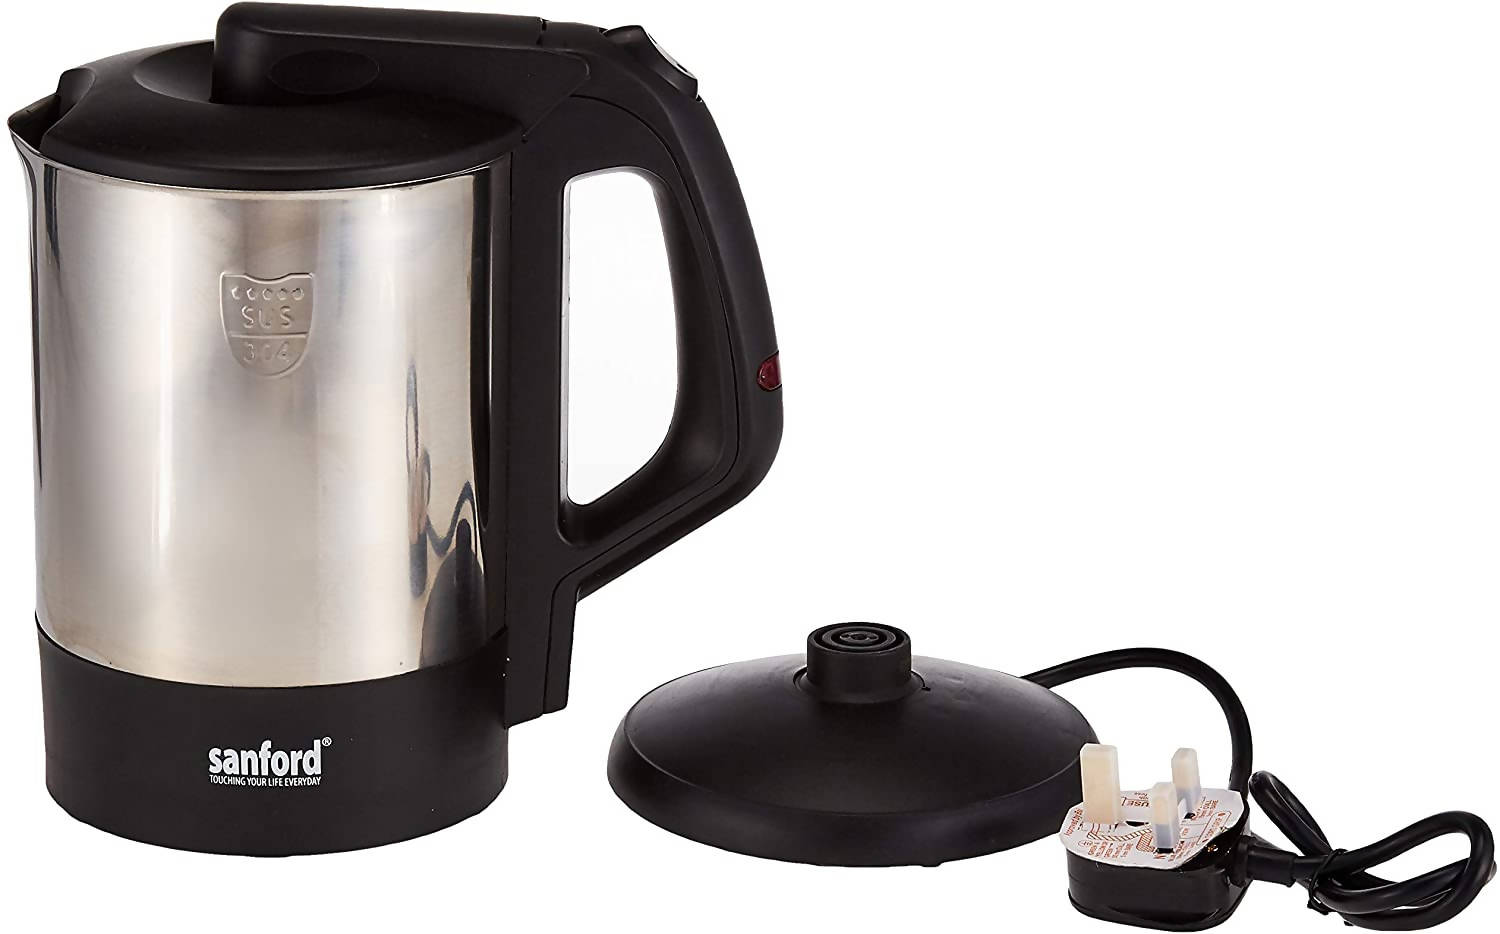 Sanford Stainless Steel Electric Kettle Black